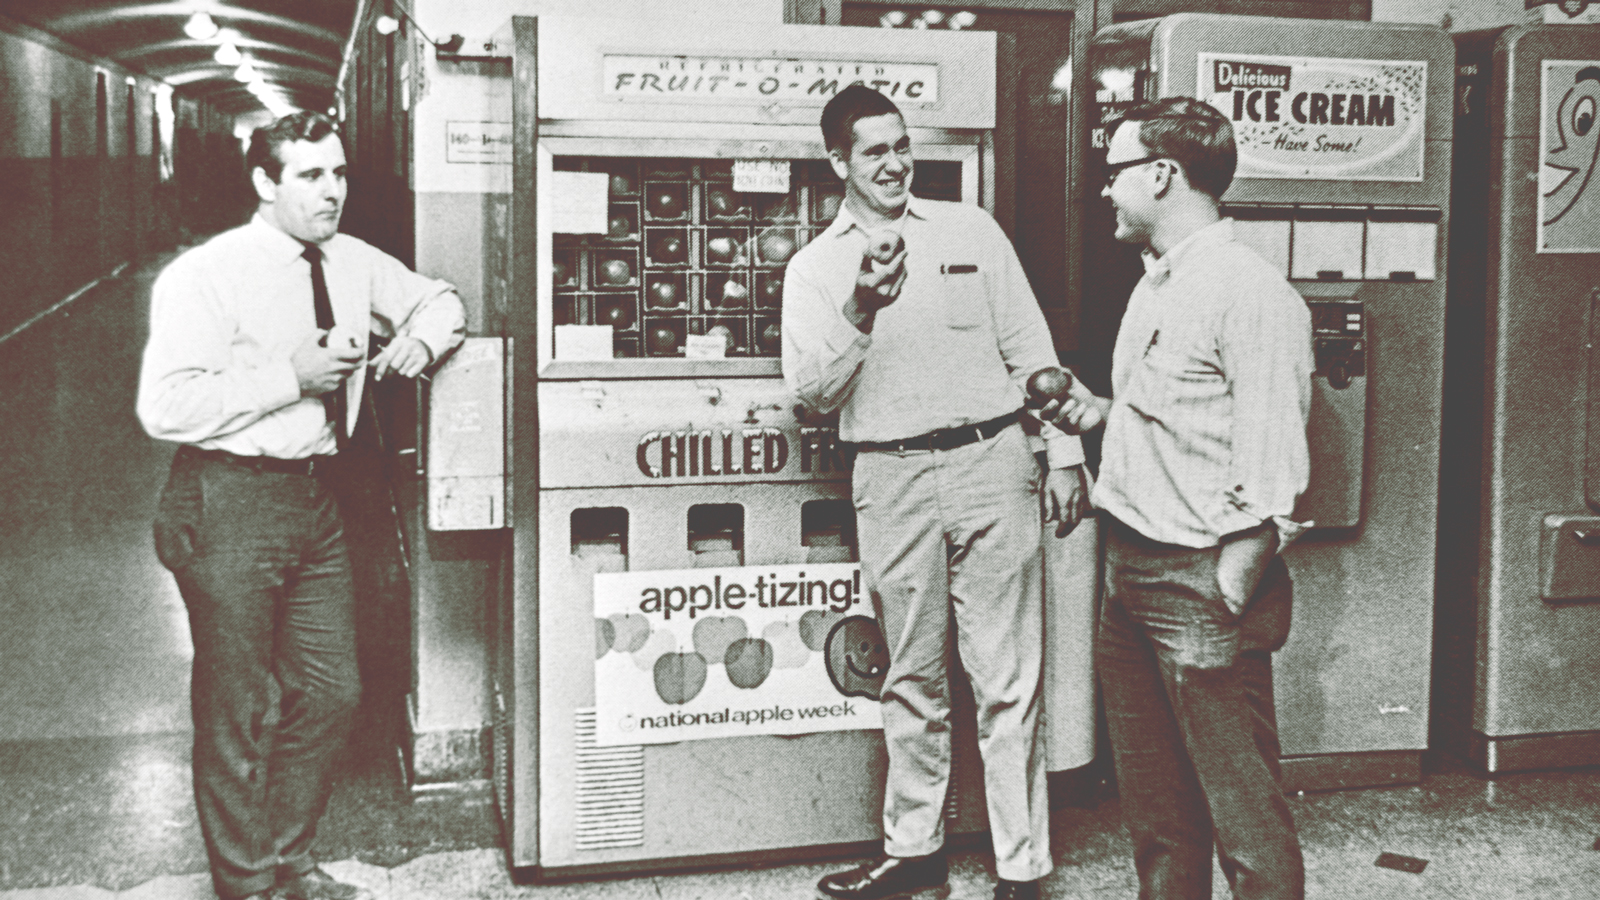 Photo shows three men enjoying apples in front of the "Fruit-o-Matic" vending machine in the Plant Sciences Building in the 1960s